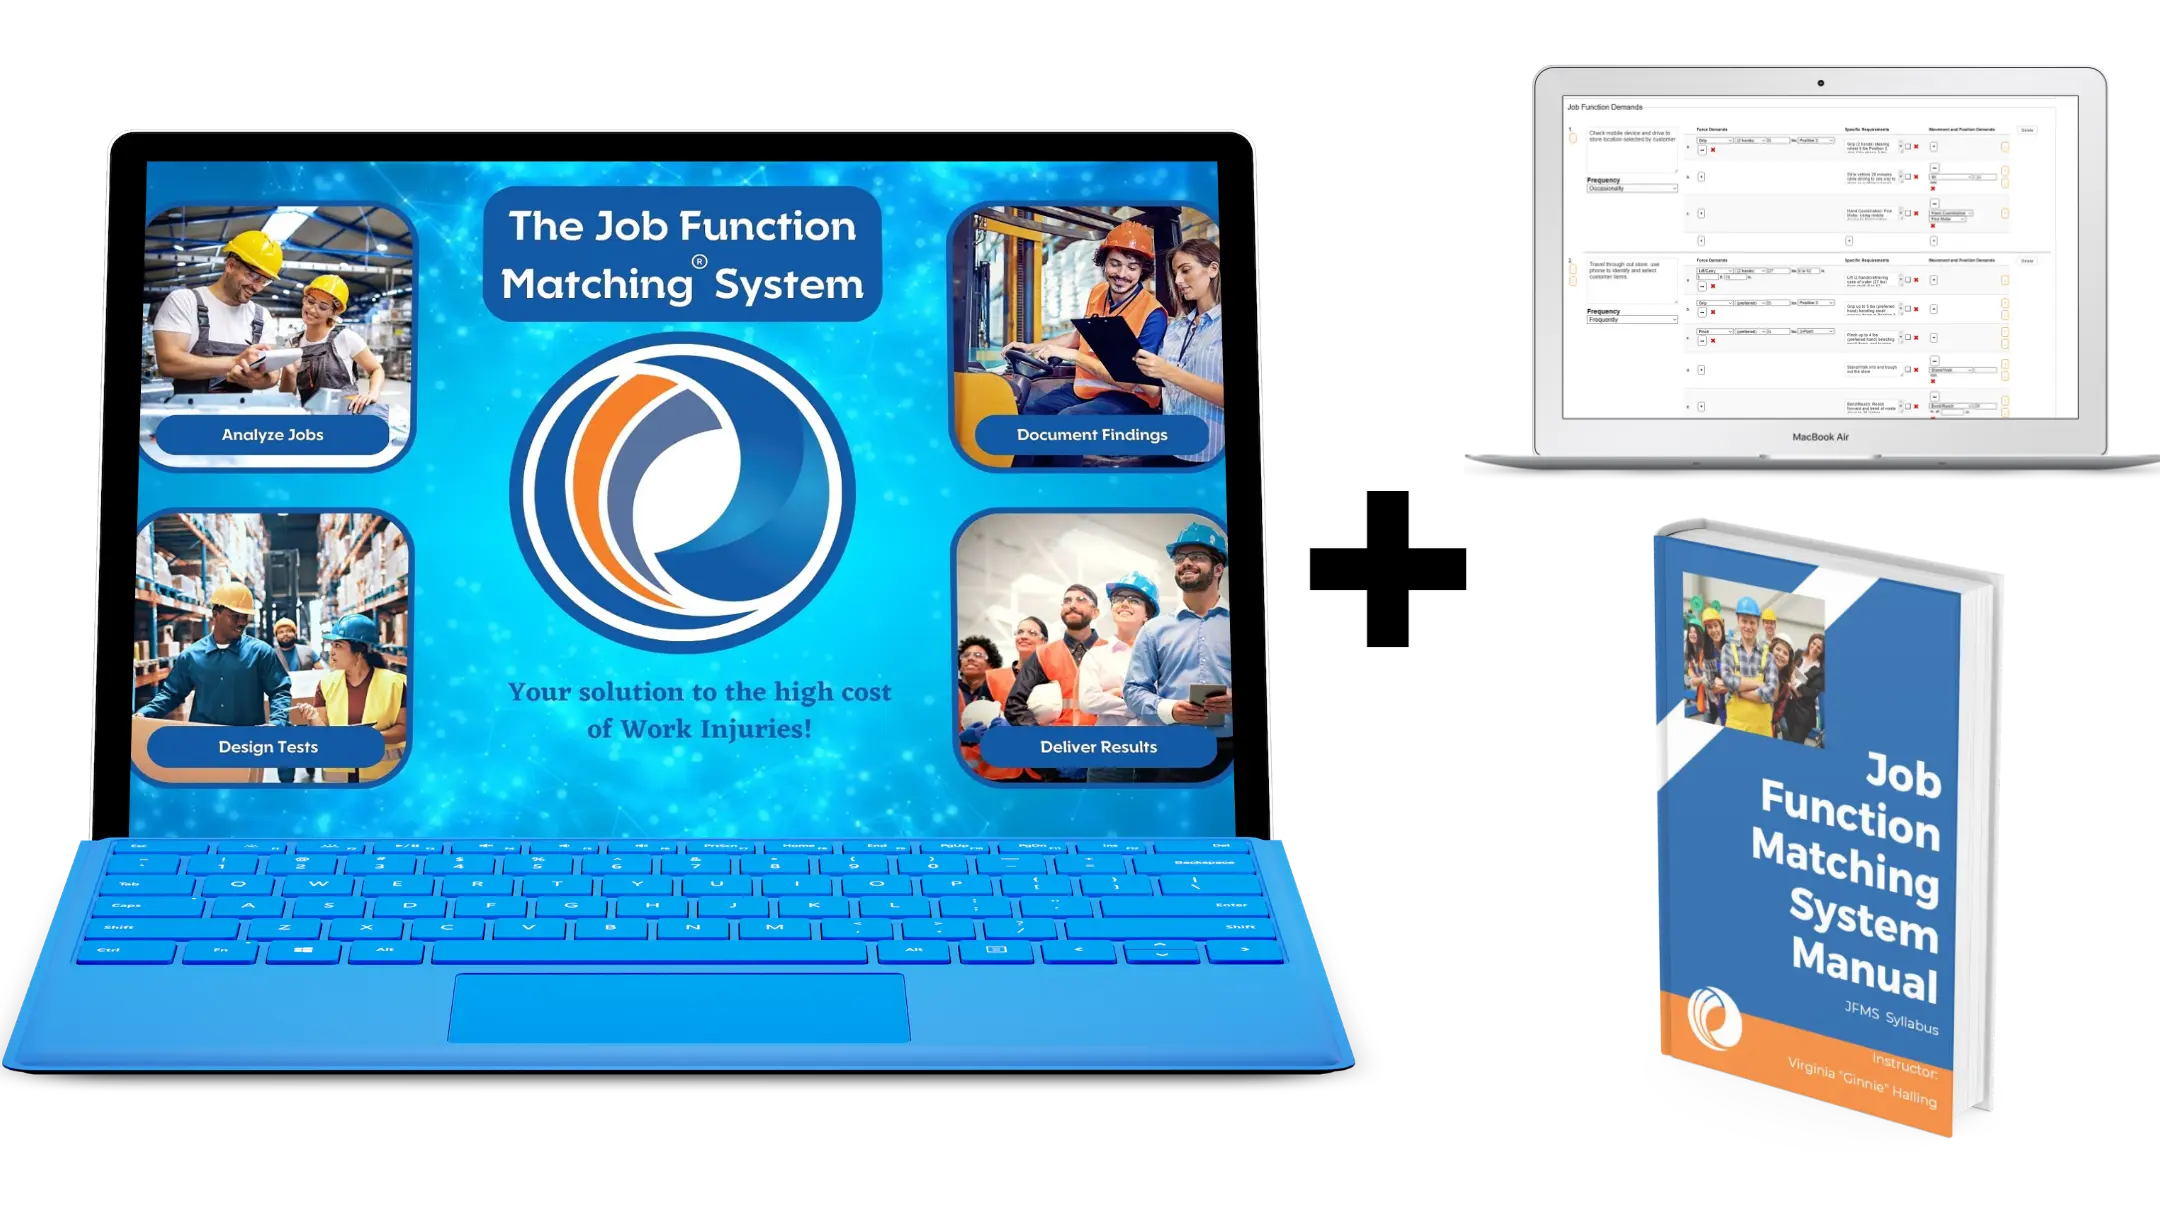 The Job Function Matching System Independent Learning is displayed on a laptop next to the Job Function Matching System Manual and the JFM Software